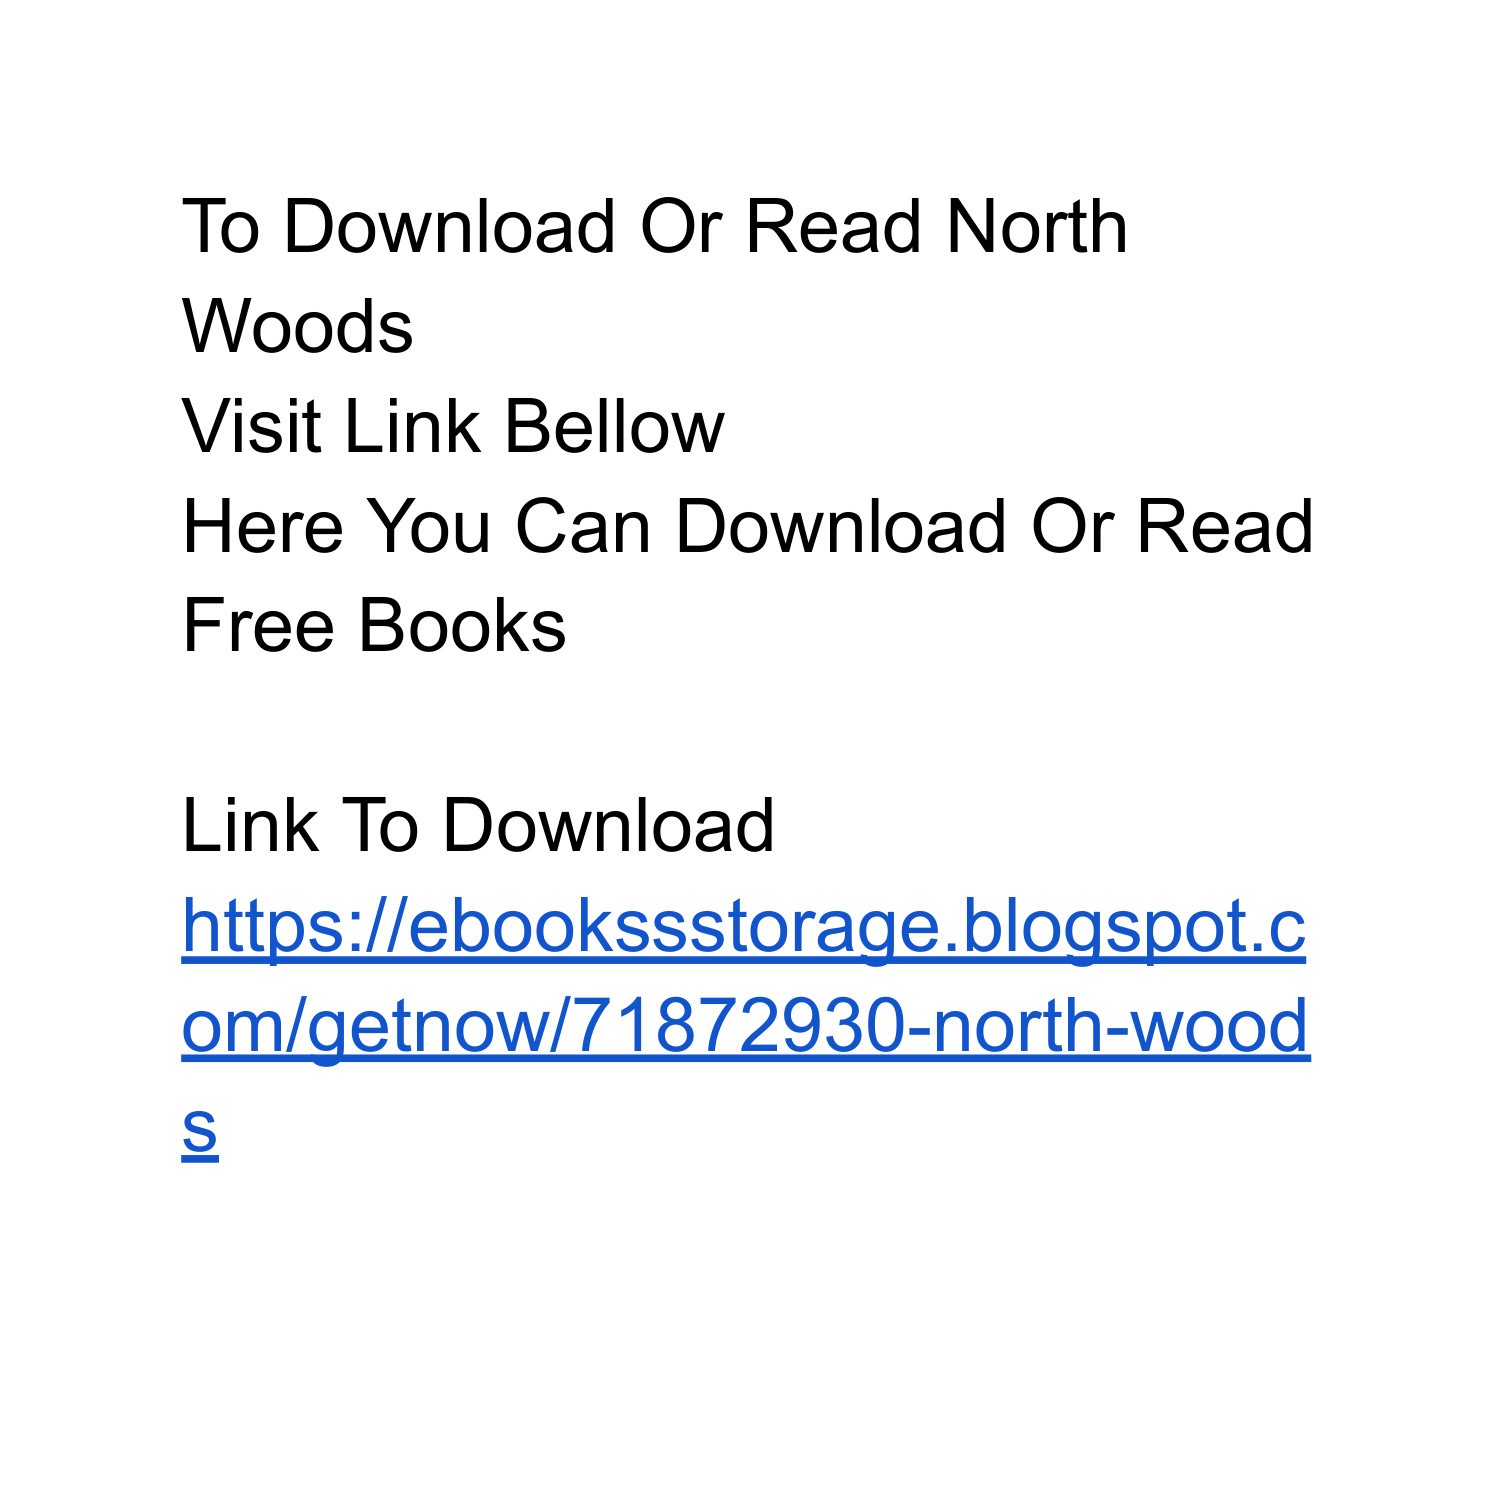 book reviews north woods